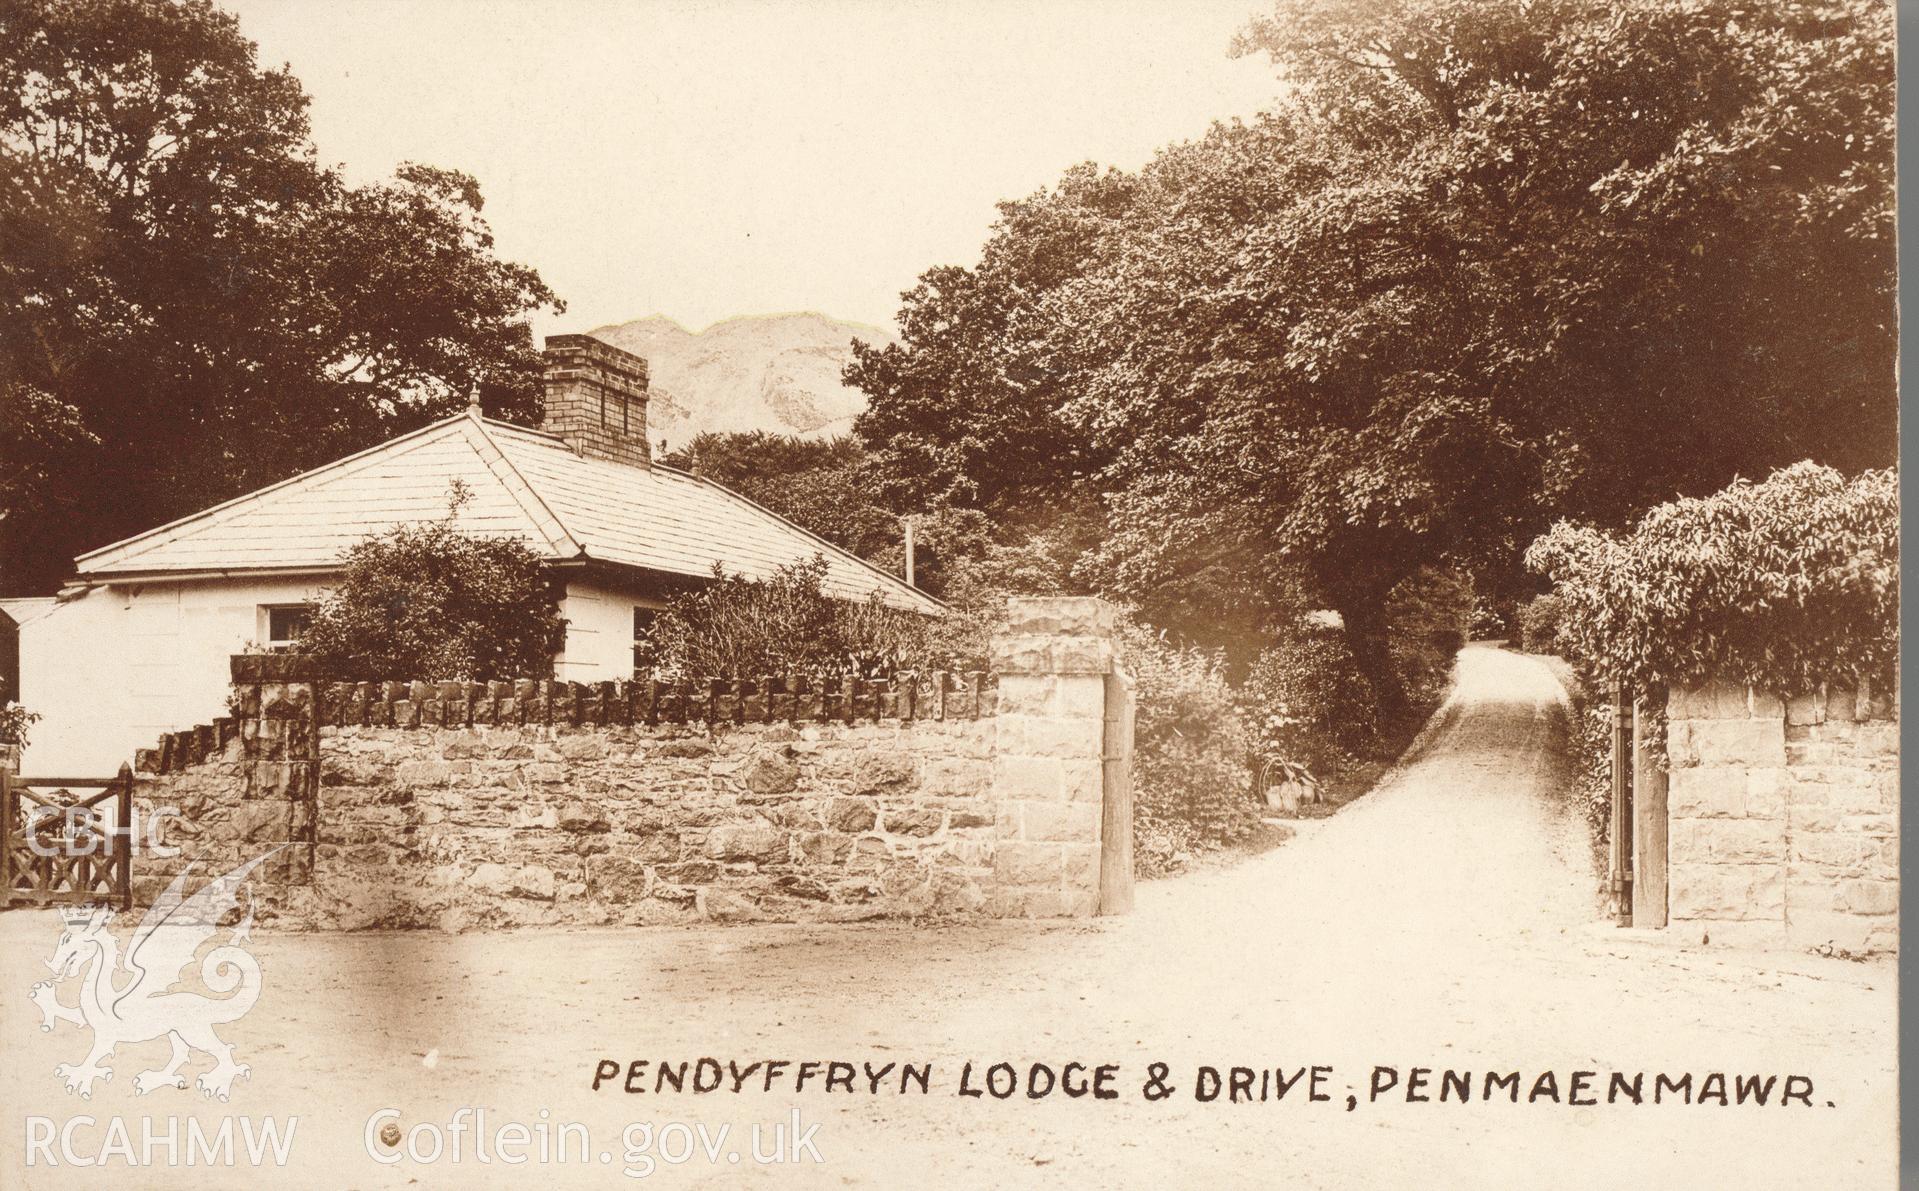 Digitised postcard image of lodge and drive at Pendyffryn Hall, Penmaenmawr. Produced by Parks and Gardens Data Services, from an original item in the Peter Davis Collection at Parks and Gardens UK. We hold only web-resolution images of this collection, suitable for viewing on screen and for research purposes only. We do not hold the original images, or publication quality scans.